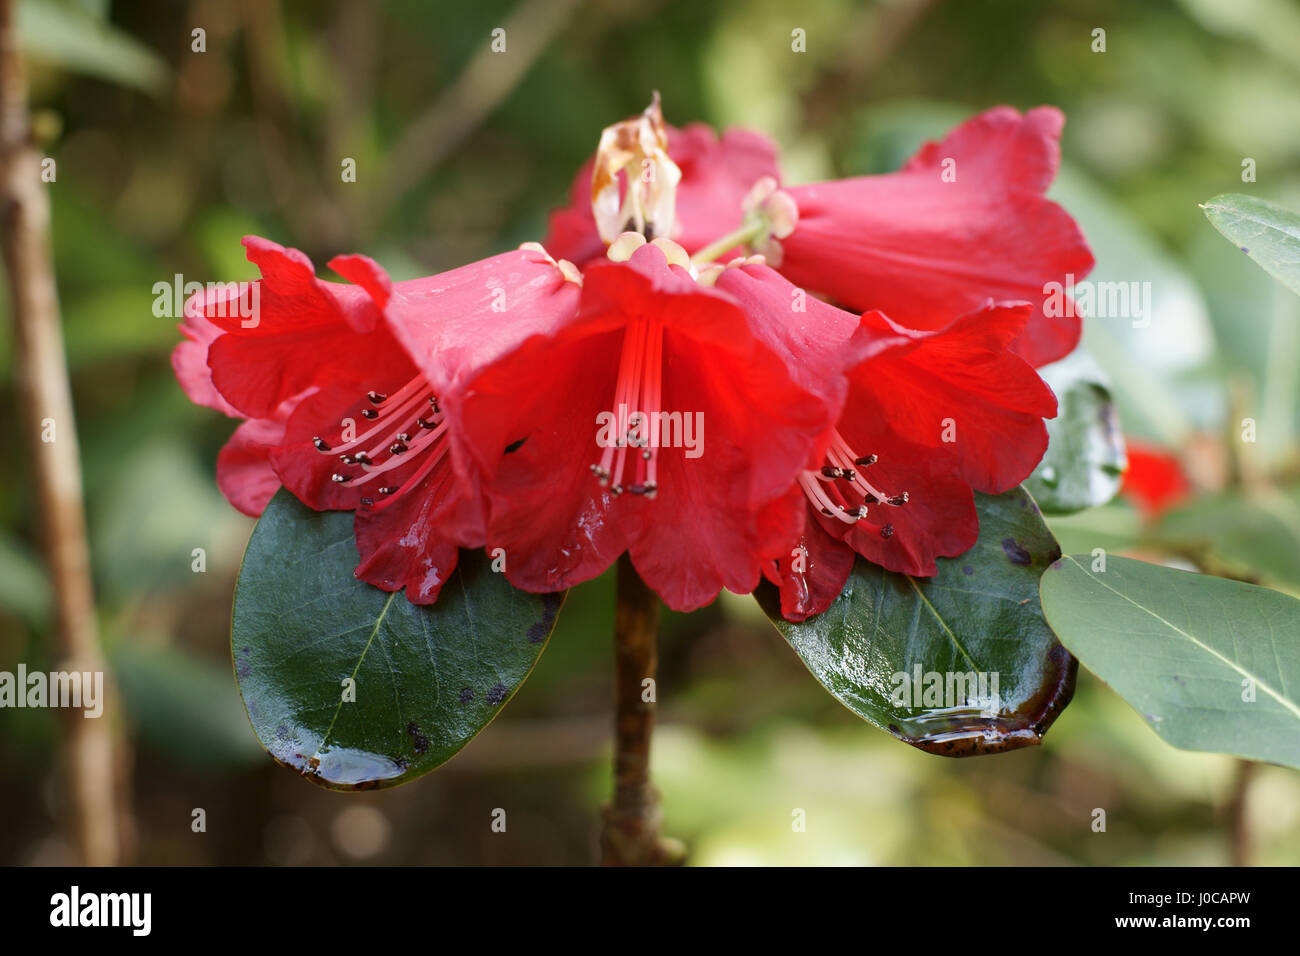 Rhododendron meddianum at Clyne gardens, Swansea, Wales, UK. Stock Photo